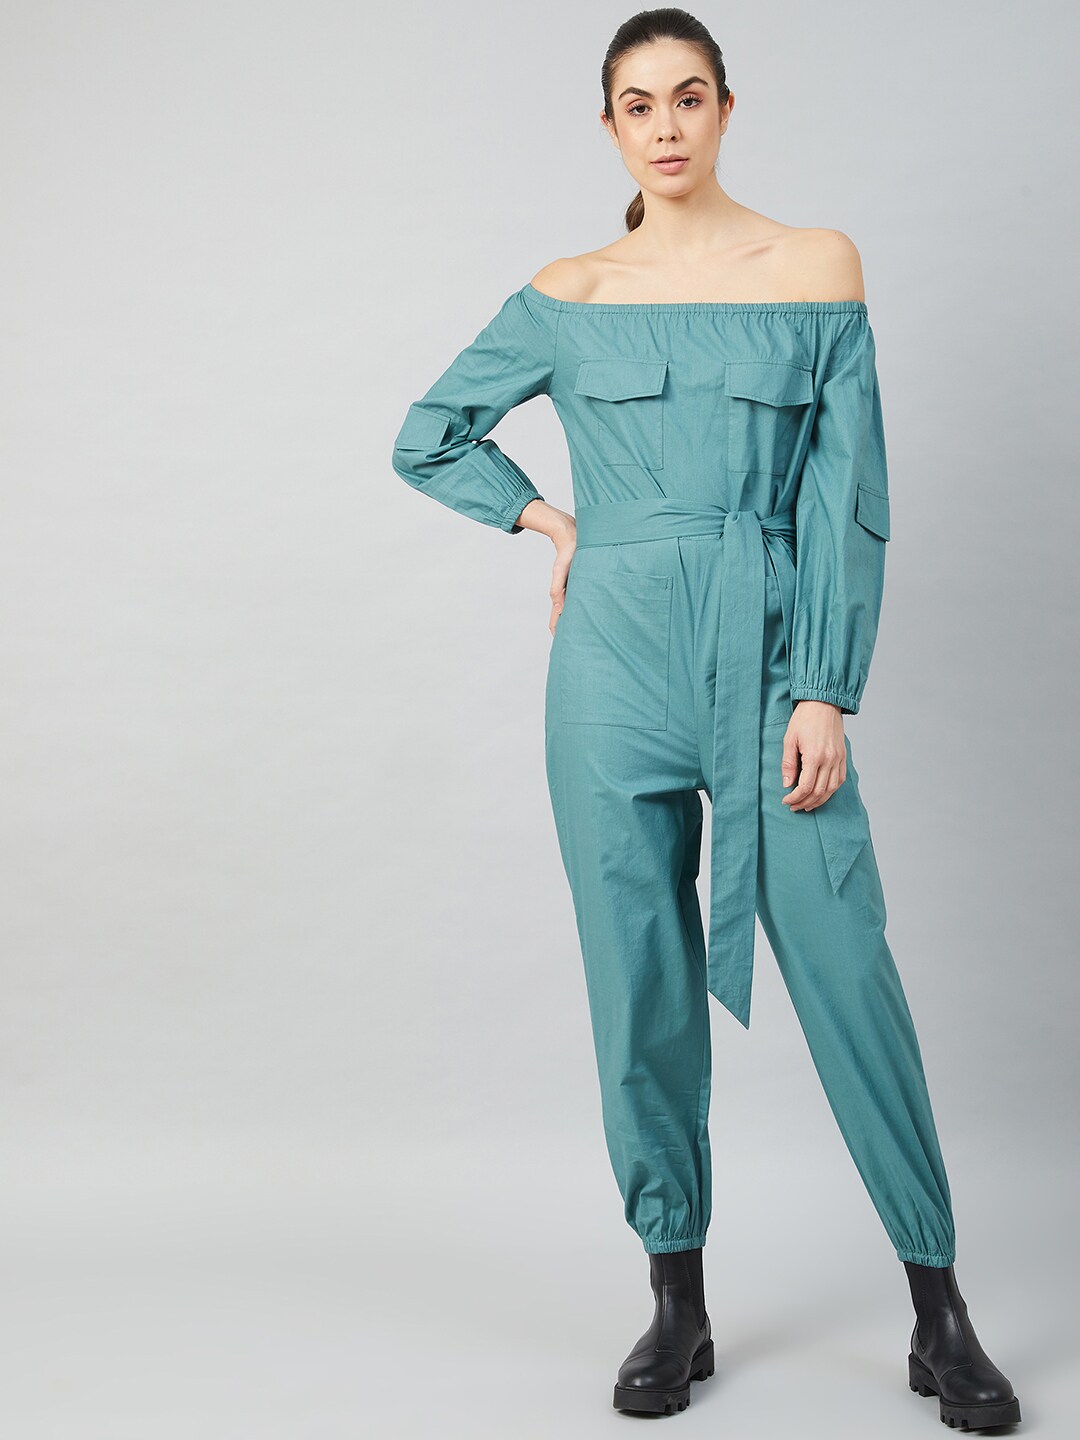 Athena Women Teal Blue Solid Cotton Jumpsuit Price in India